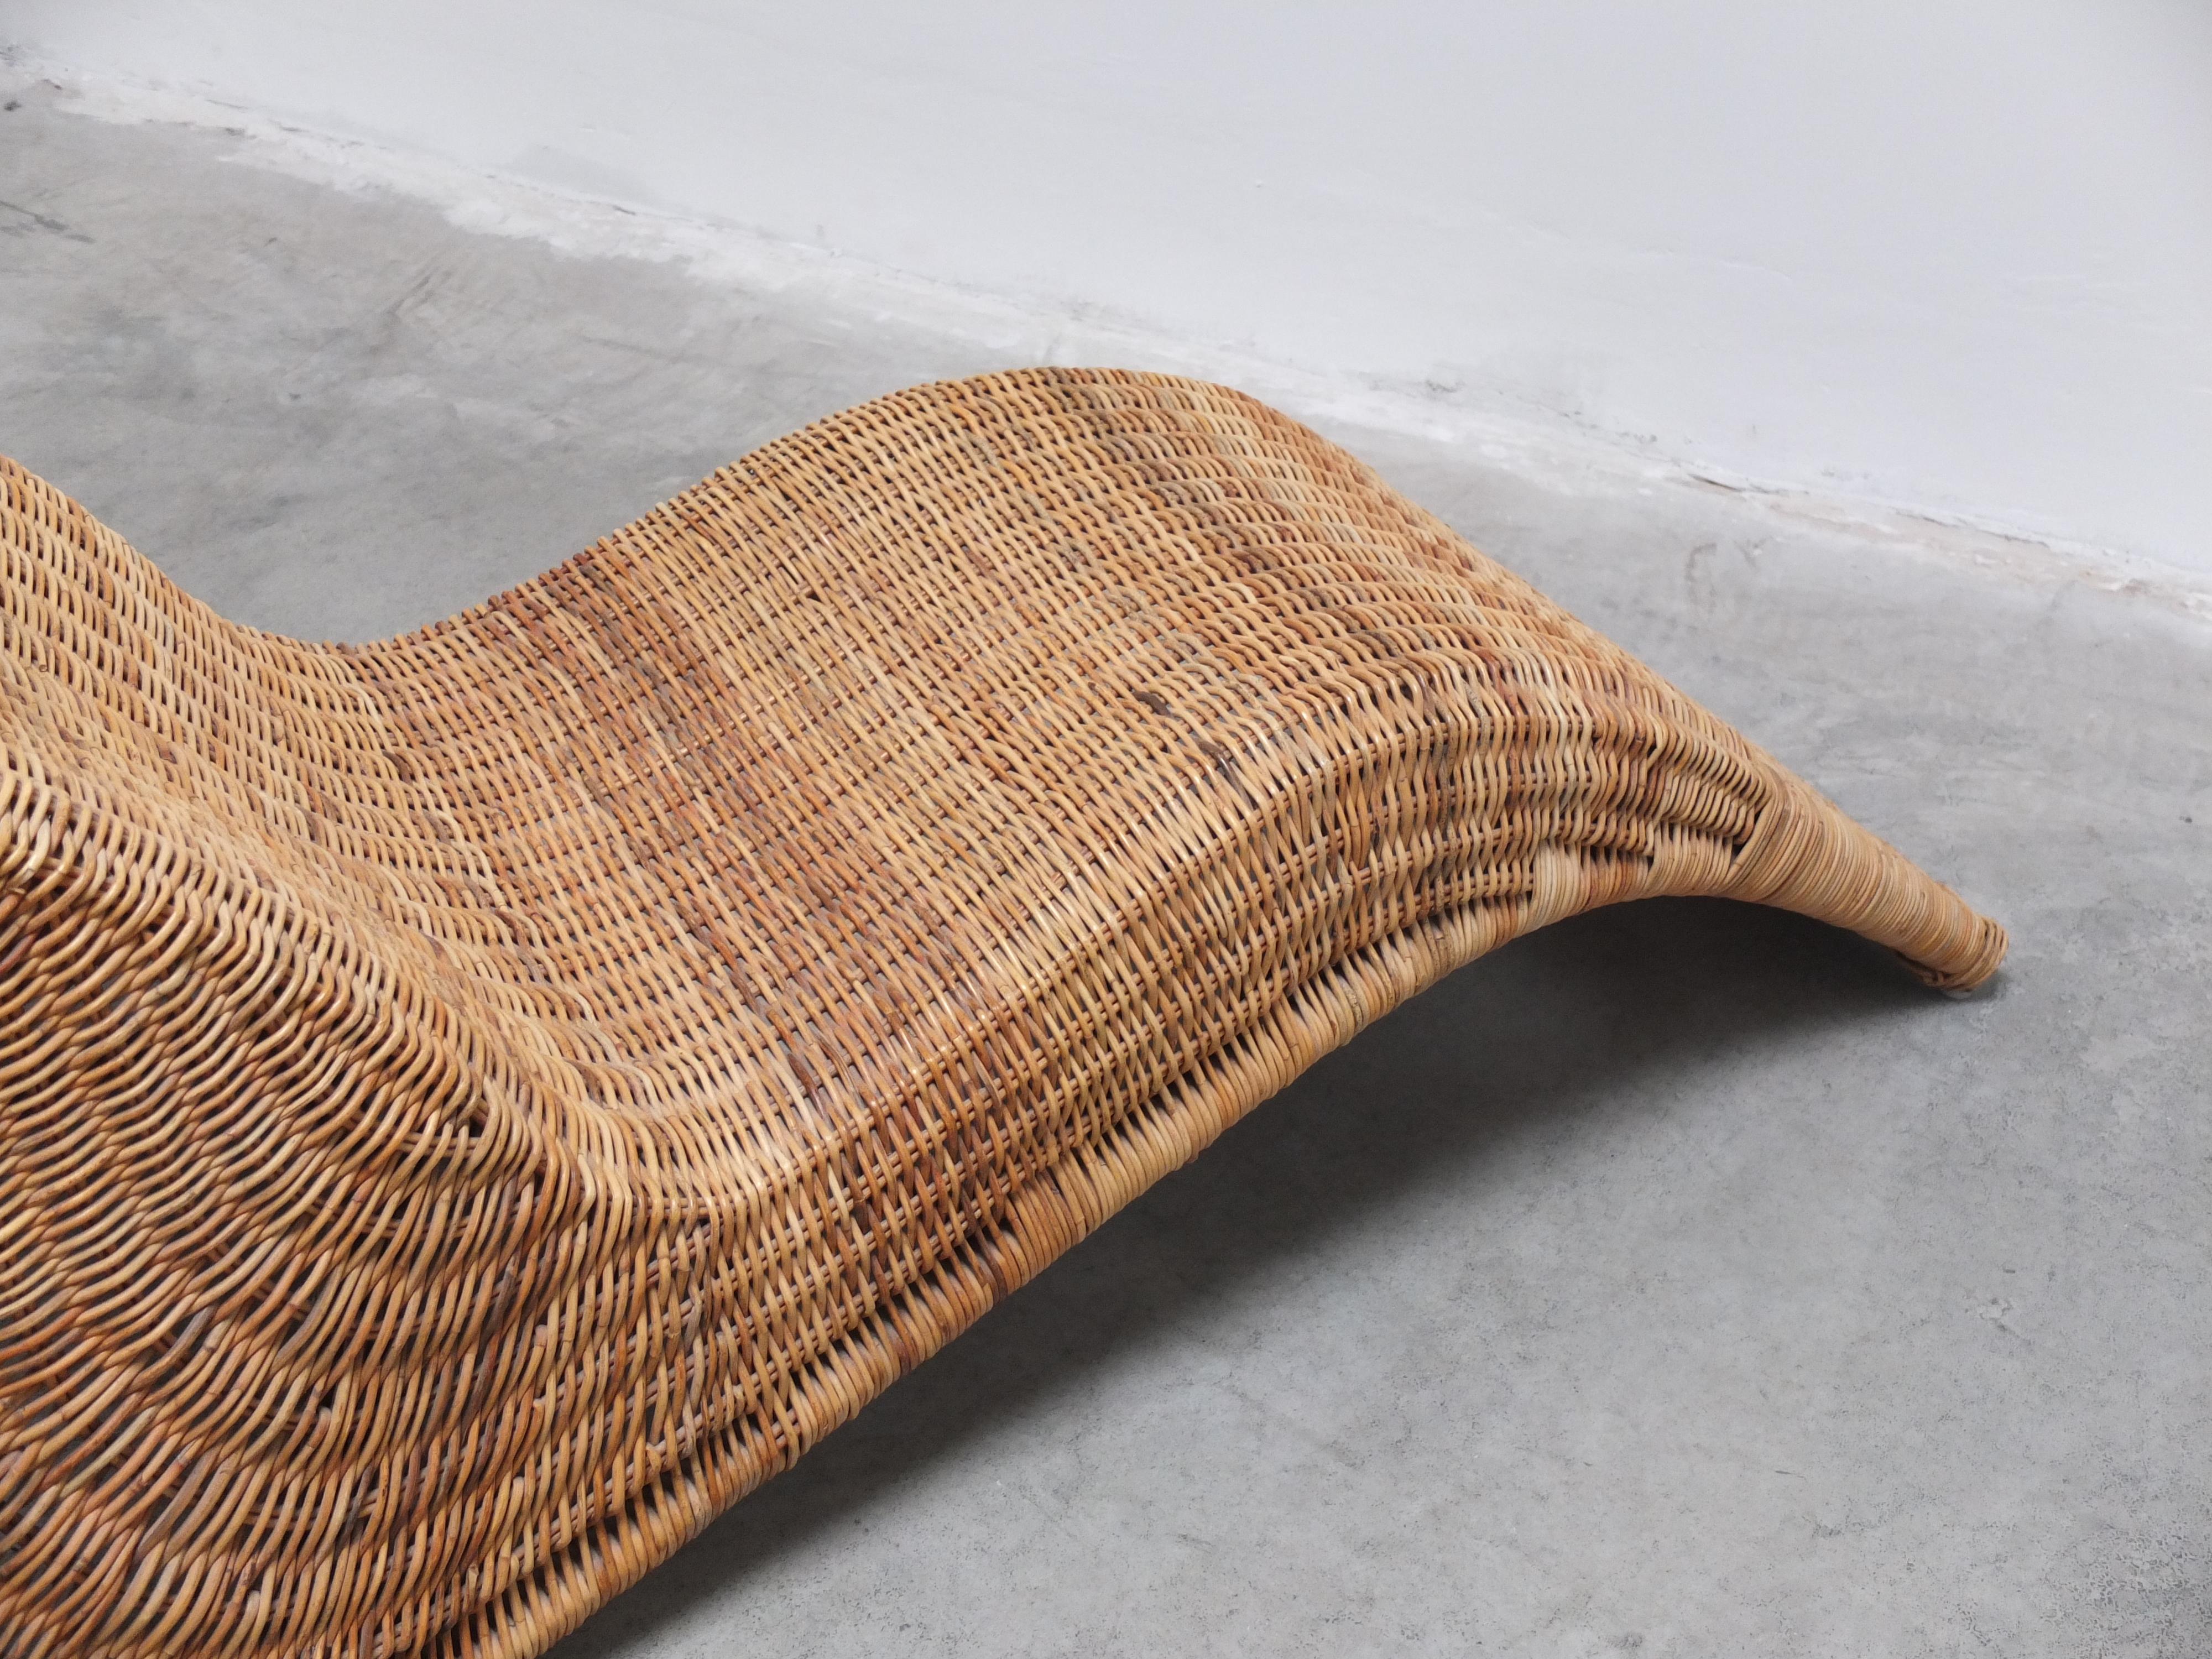 Rattan 'Karlskrona' Chaise Longue by Karl Malmvell for IKEA, 1998 For Sale 7